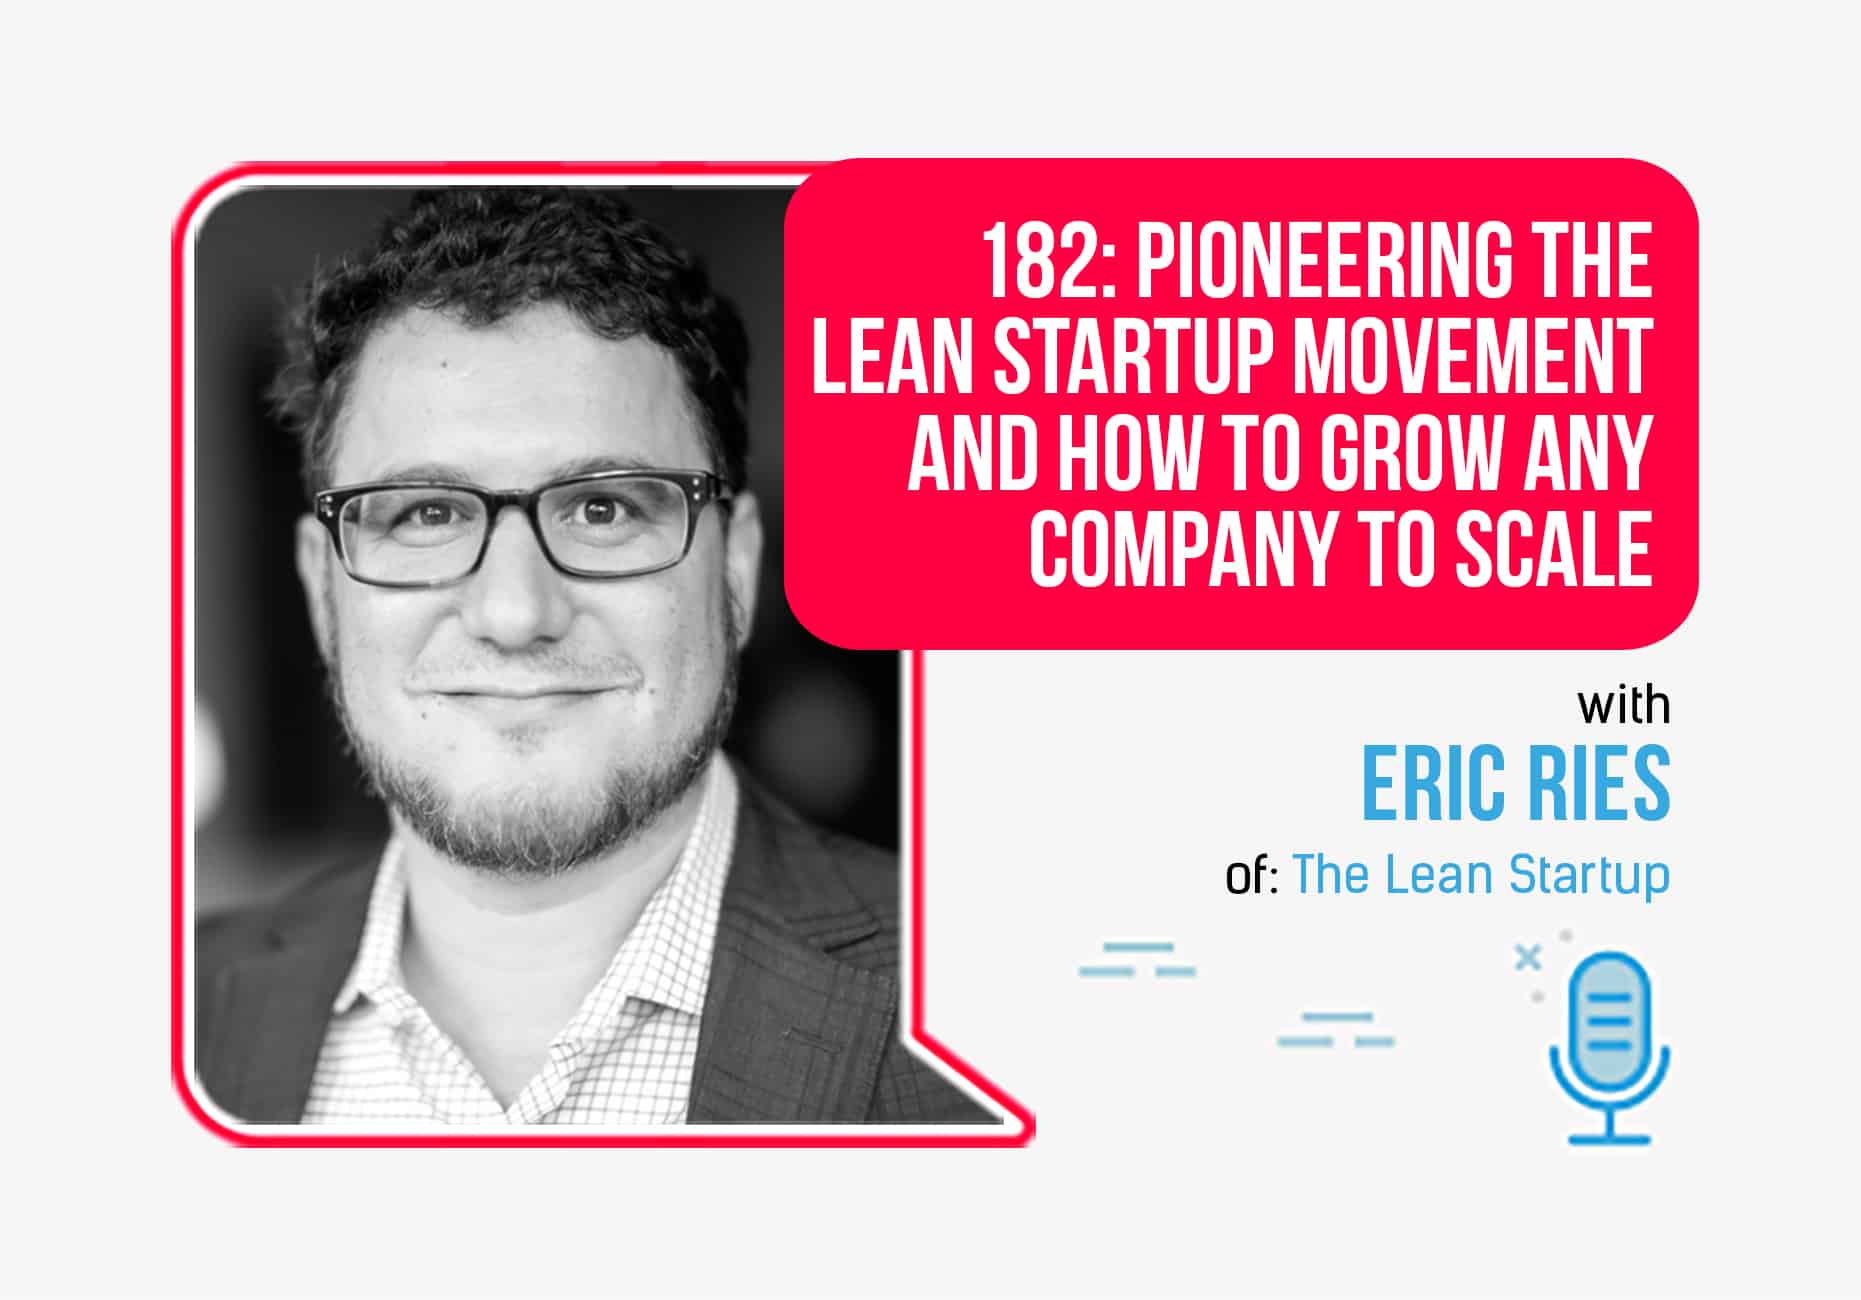 182: Eric Ries on Pioneering the Lean Startup